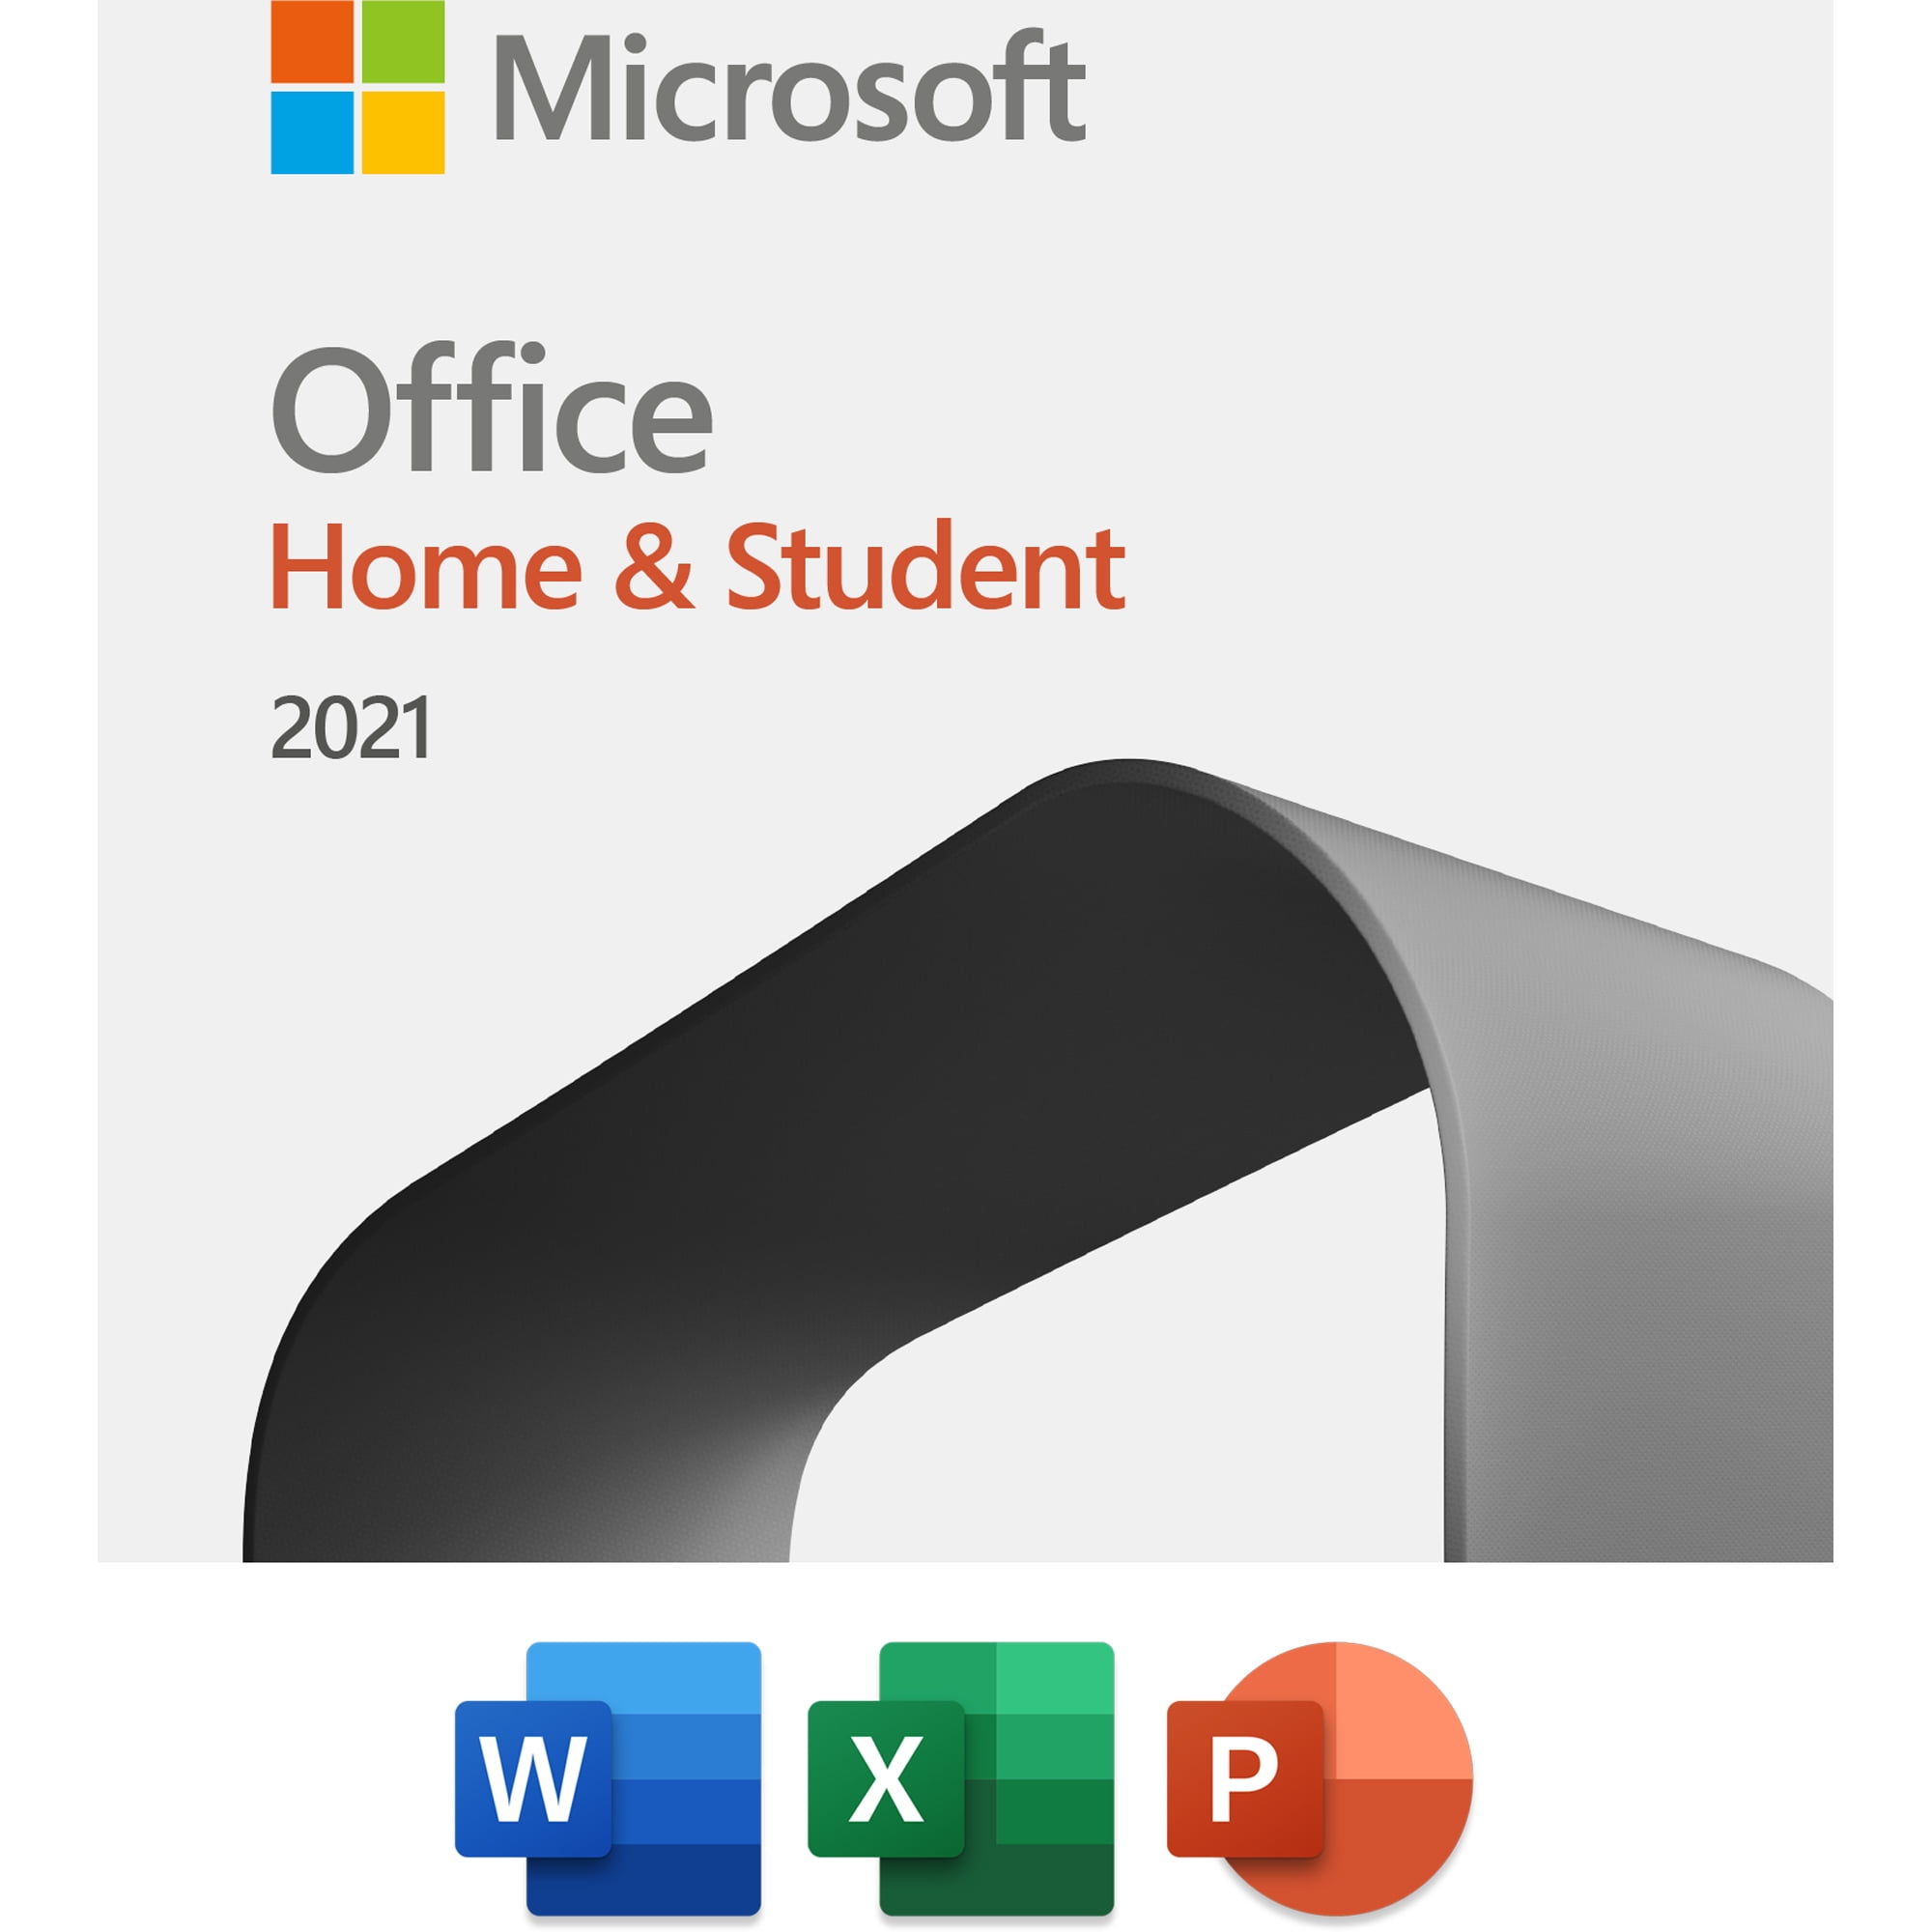 Microsoft T5D-03518 Office Home & Business 2021 ,One Time Purchase 